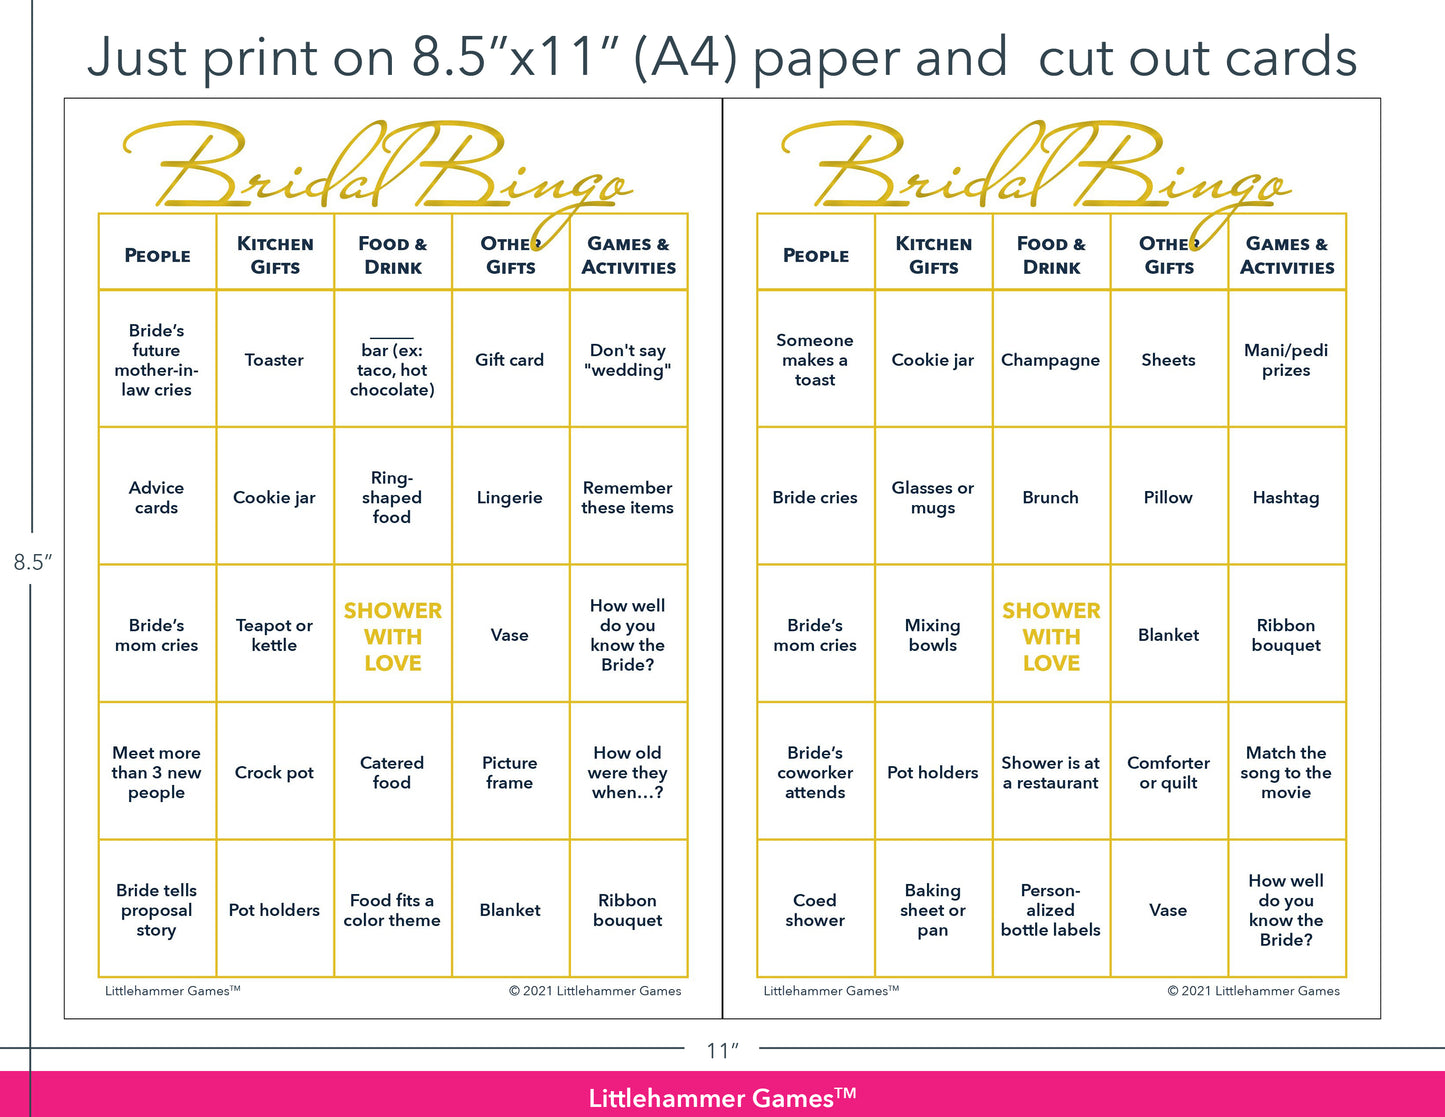 Gold and white Bridal Bingo game cards with printing instructions